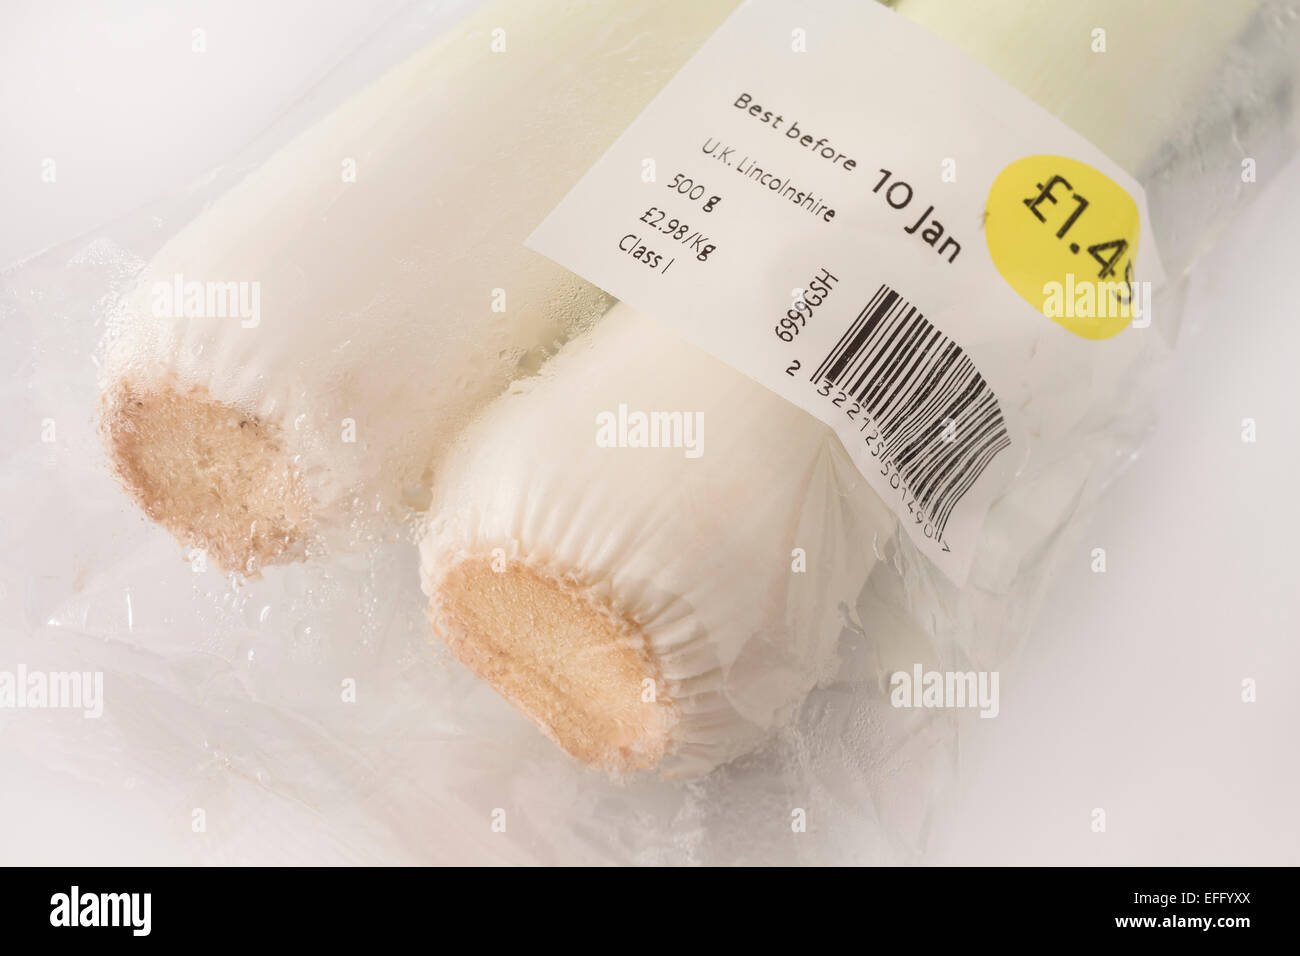 Leeks From a Major UK Supermarket Sweating Inside Unnecessary Plastic Packaging With Best Before Date Stock Photo